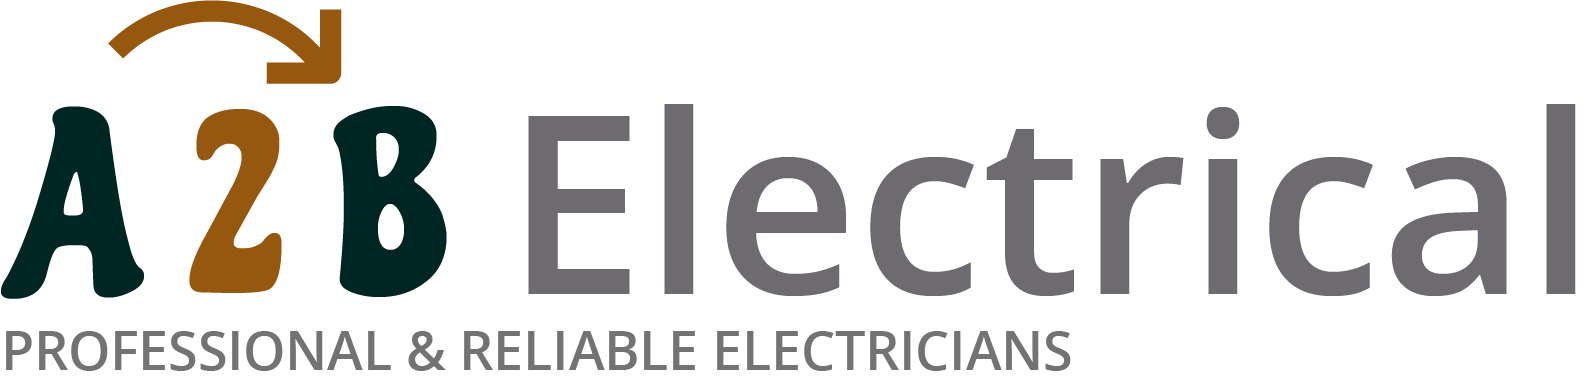 If you have electrical wiring problems in Woodbridge, we can provide an electrician to have a look for you. 